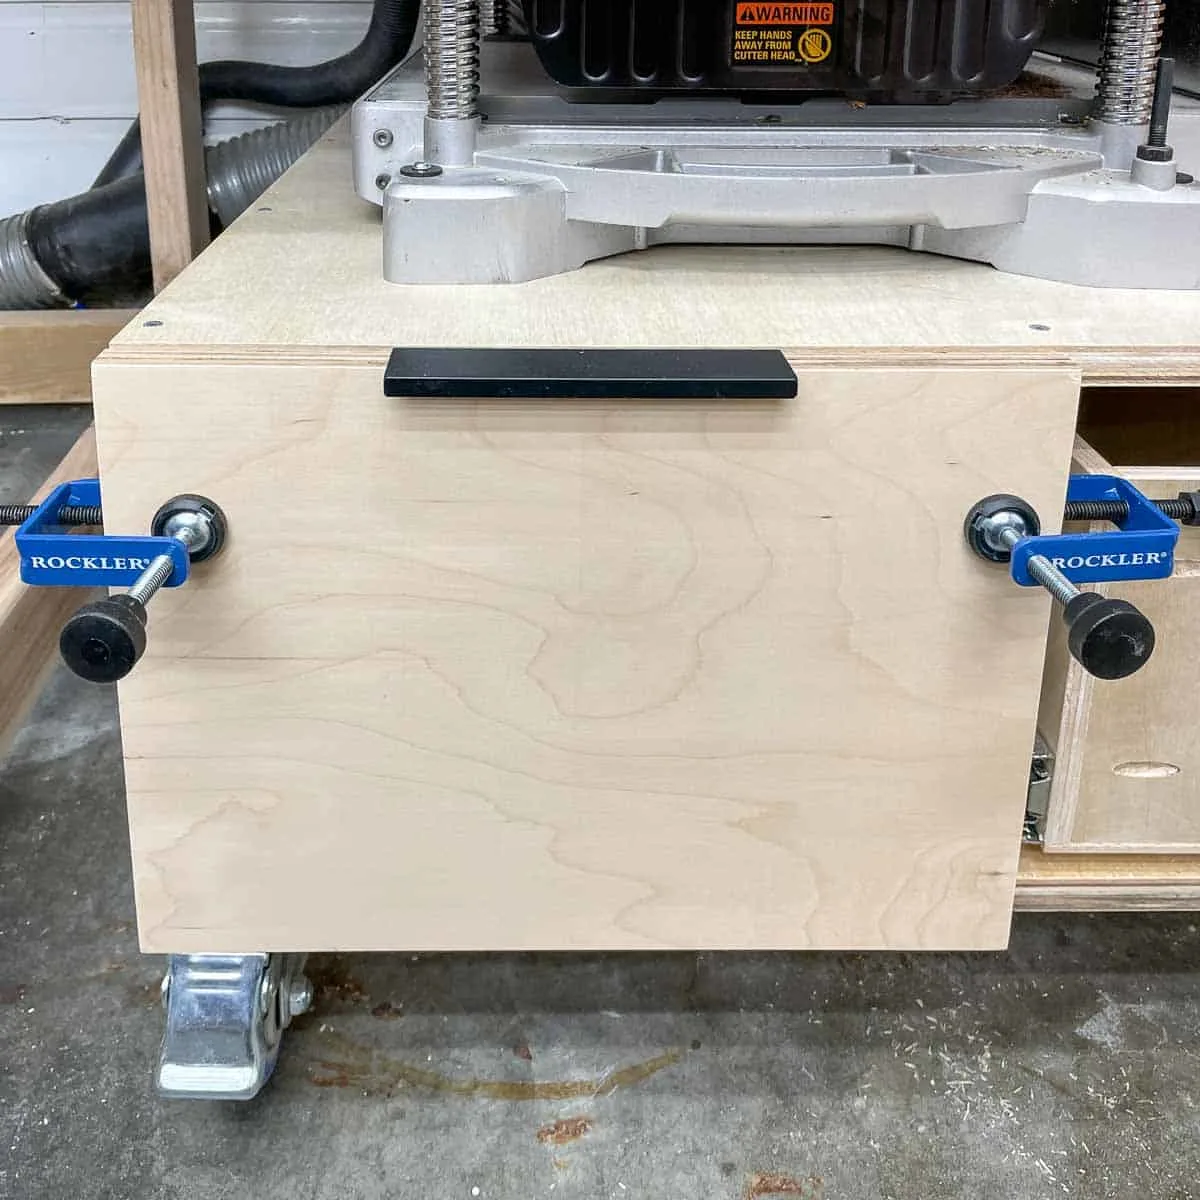 installing drawer front on drawer in planer stand with specialty clamps